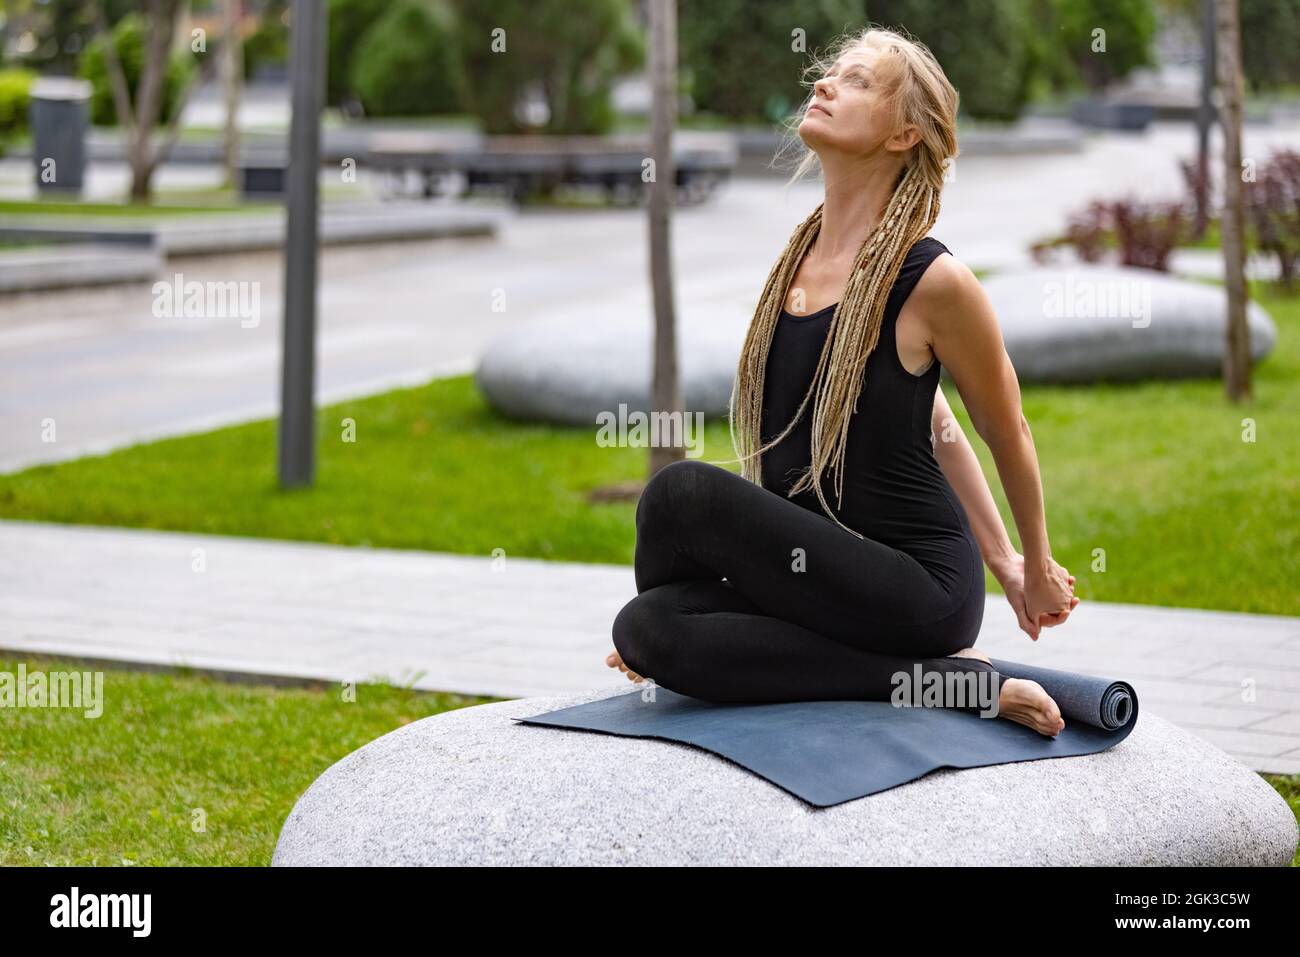 Young beautiful woman with blonde hair doing yoga exercise in green public  park in summer morning, outdoors. Healthy lifestyle, mental health concept  Stock Photo - Alamy